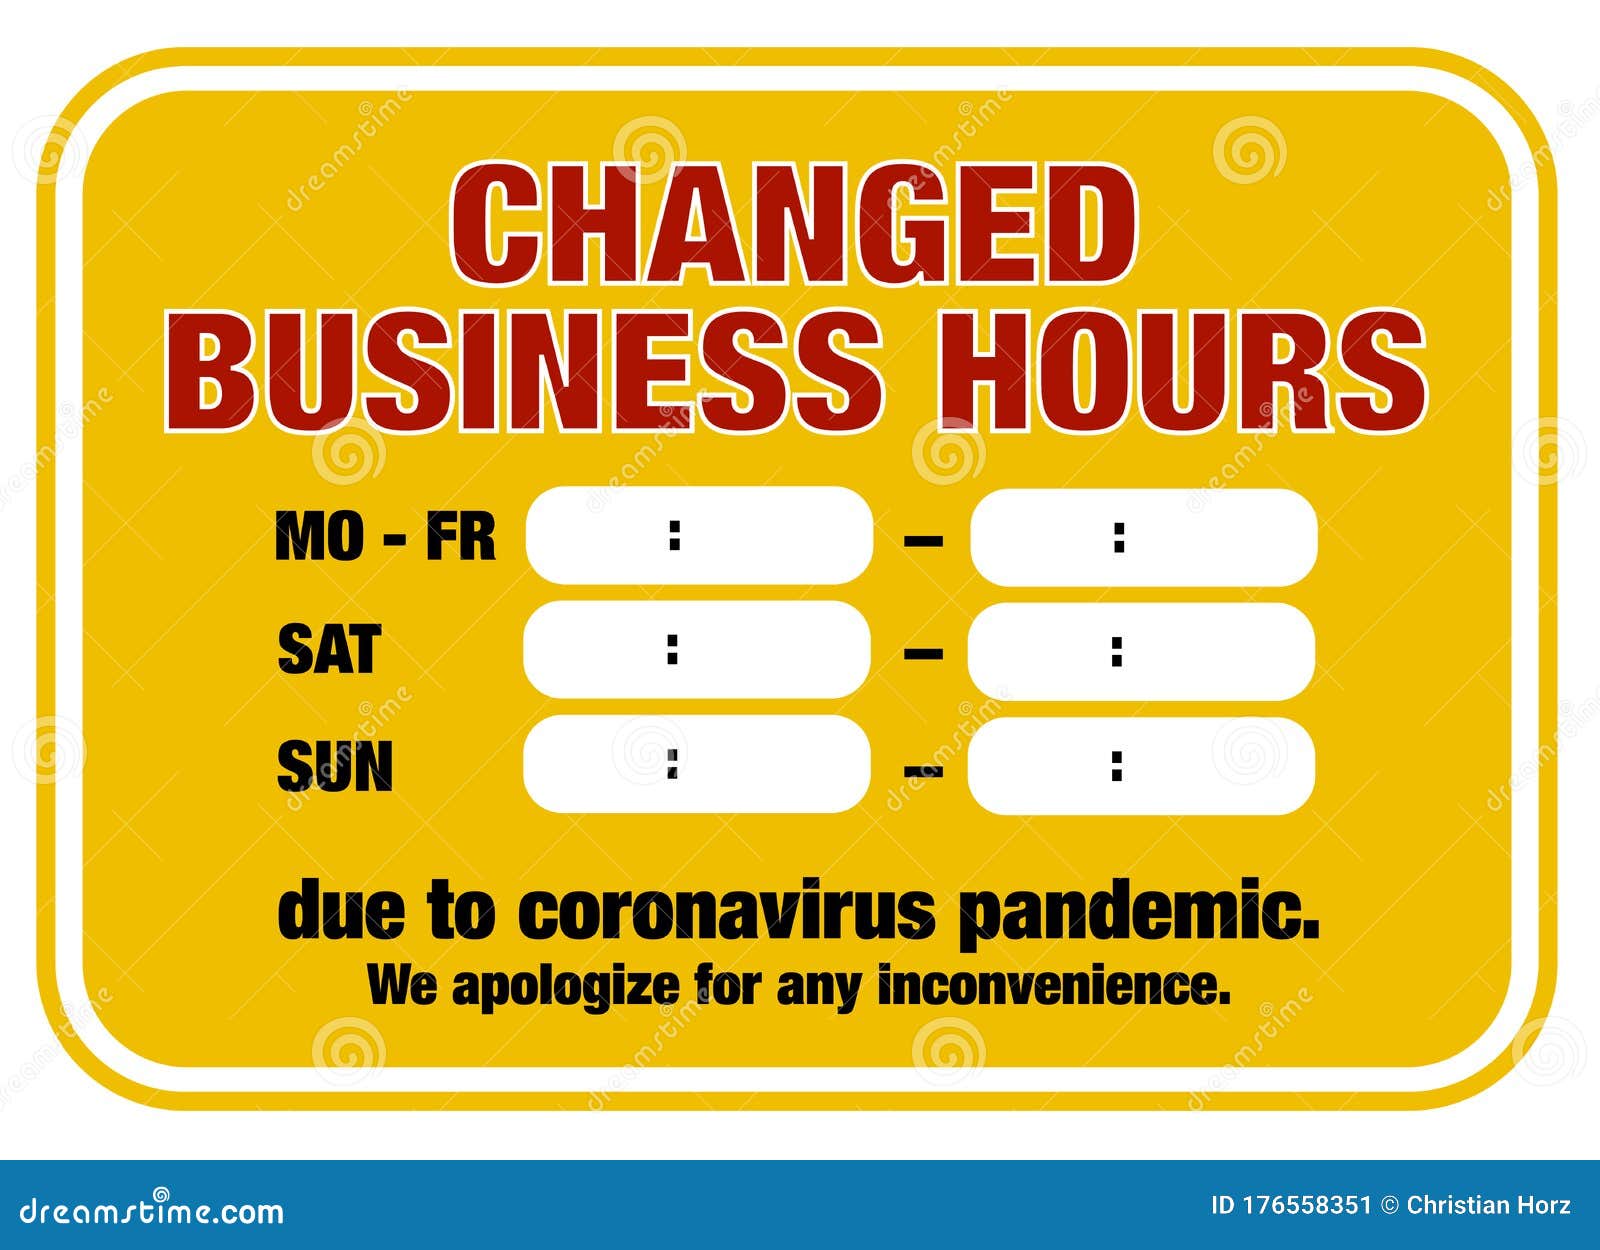 changed business hours sign template corona pandemic